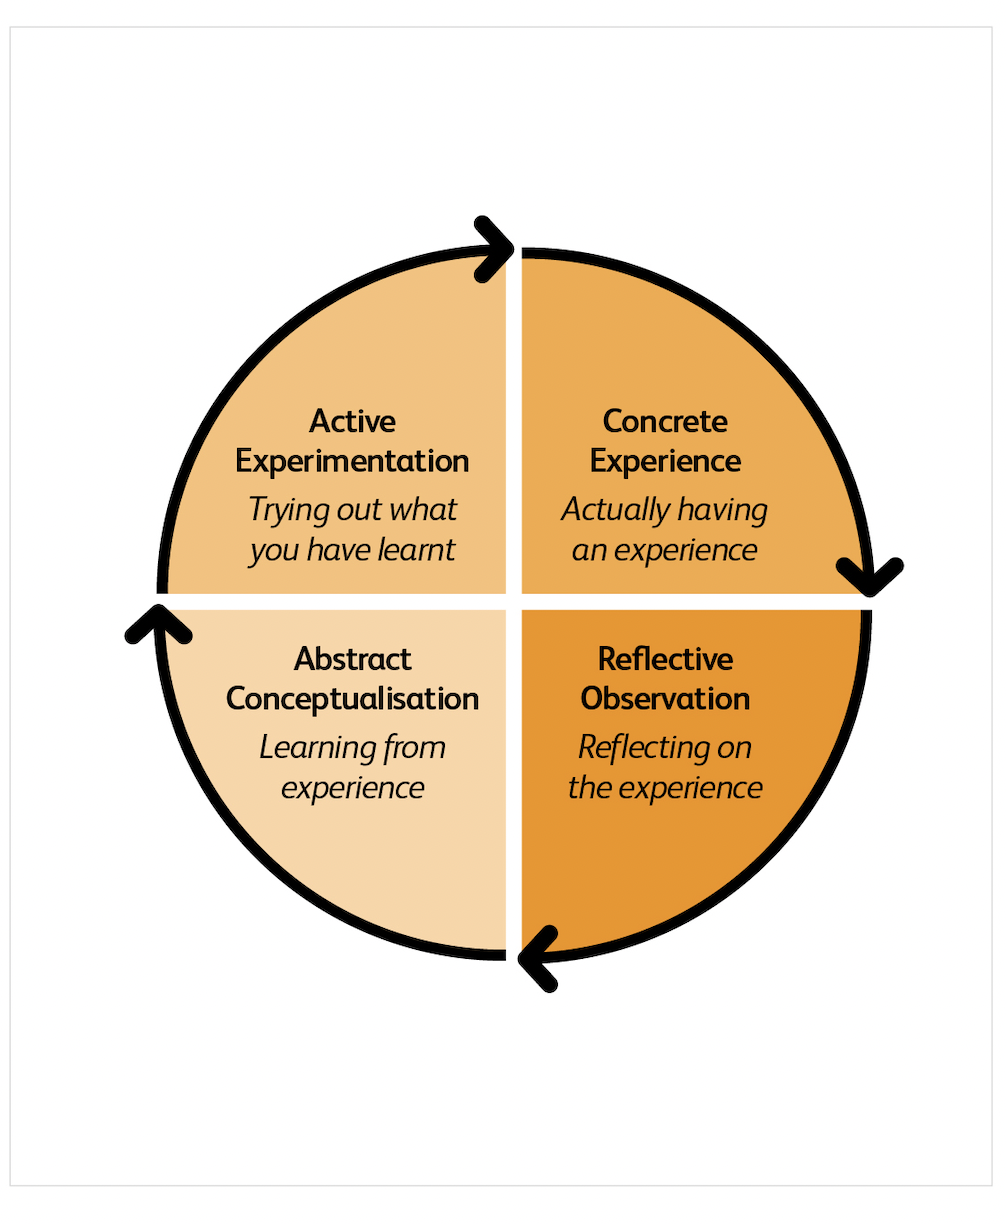 Learning cycle diagram showing the following four cycles: 1. Active experimentation: Trying out what you learnt 2. Concrete experience: Actually having an experience 3. Reflective observation: Reflecting on the experience 4. Abstract conceptualisation: Learning from experience Figure 4: Kolb’s Experiential Learning Cycle